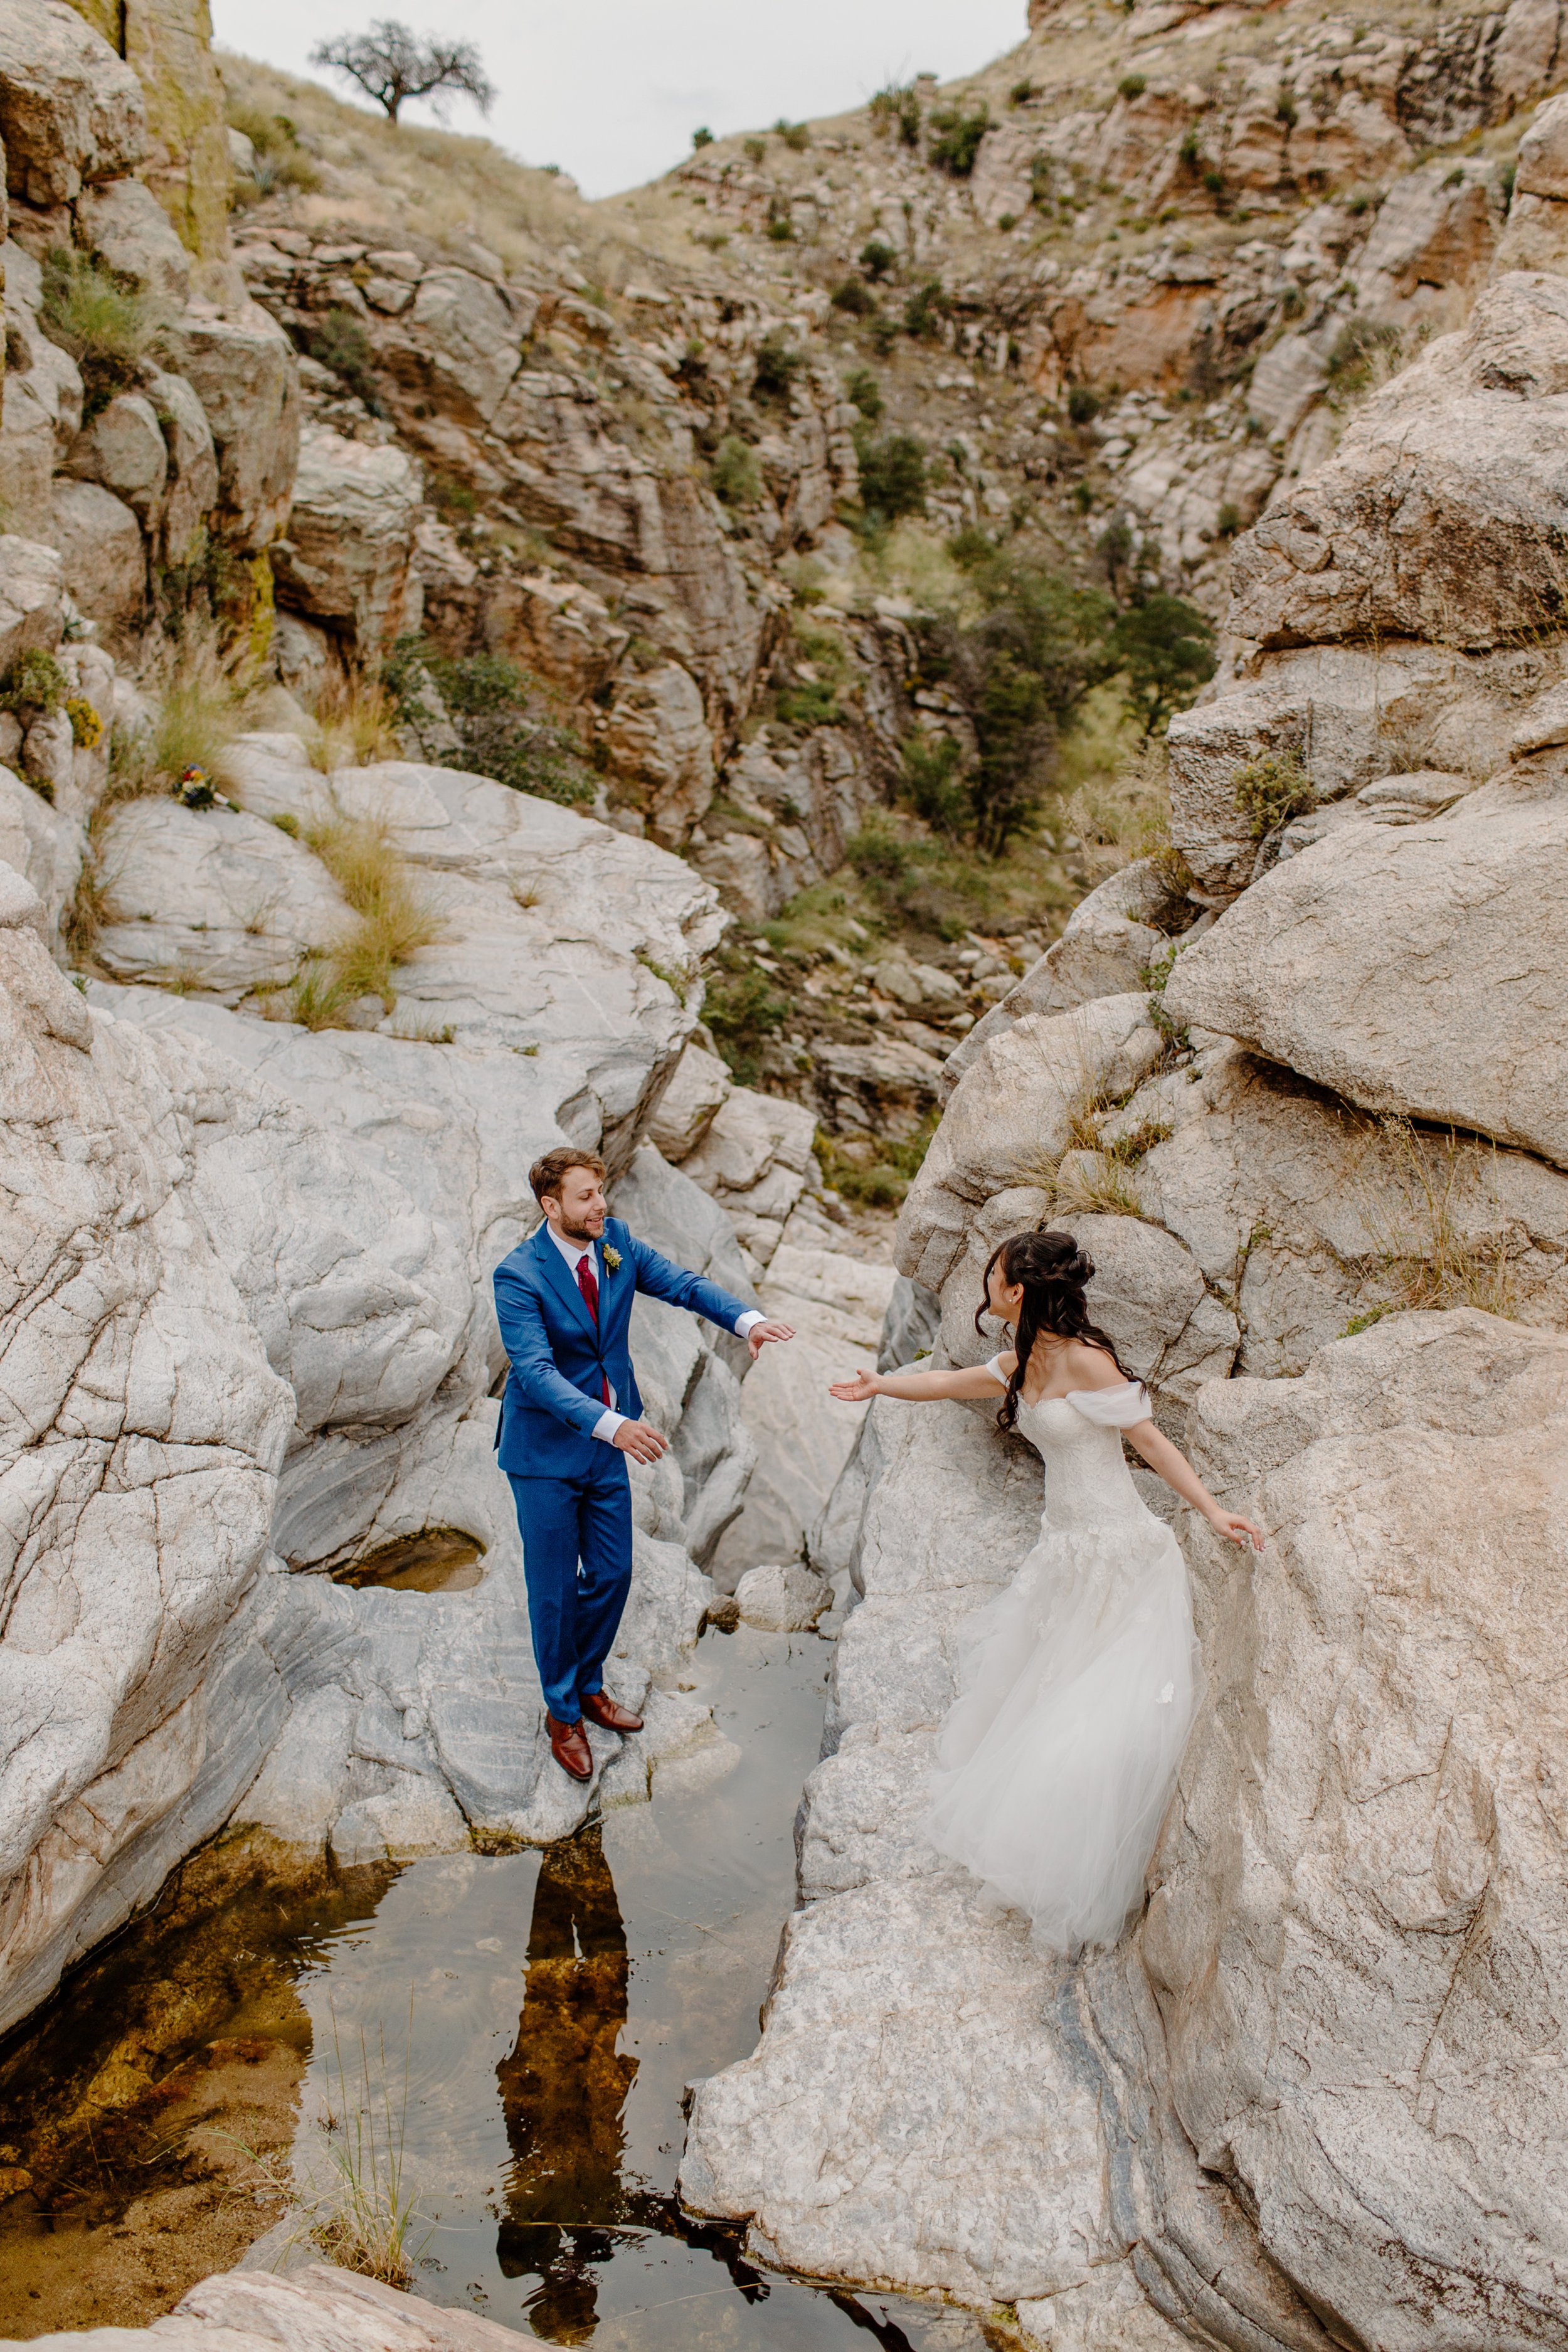  bride and groom standing on boulders in Arizona on rock climbing session 